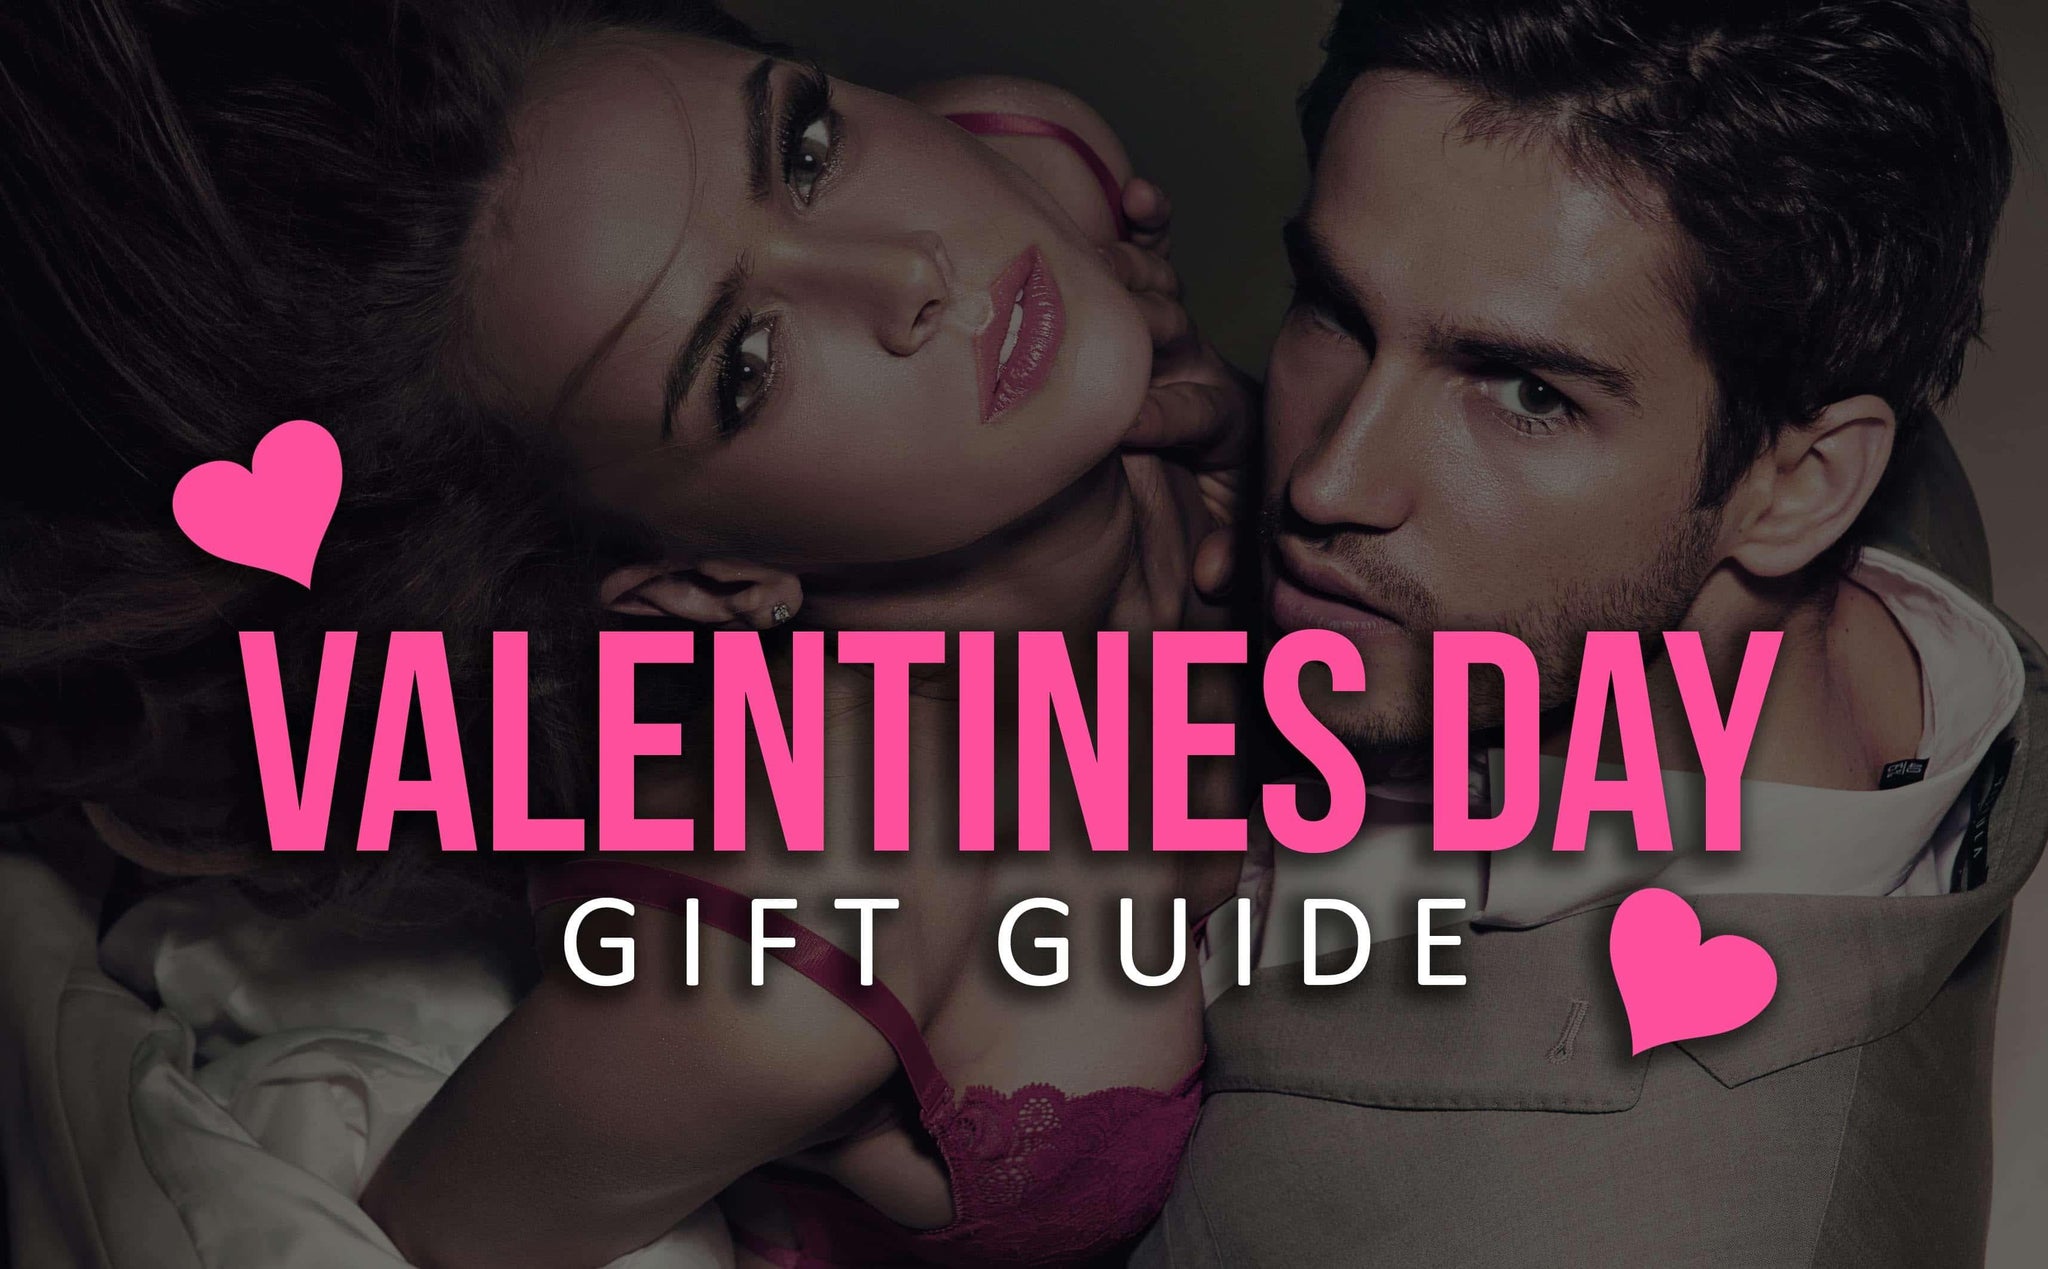 Valentines Day Gift Guide - https://www.mysexshop.co.za/